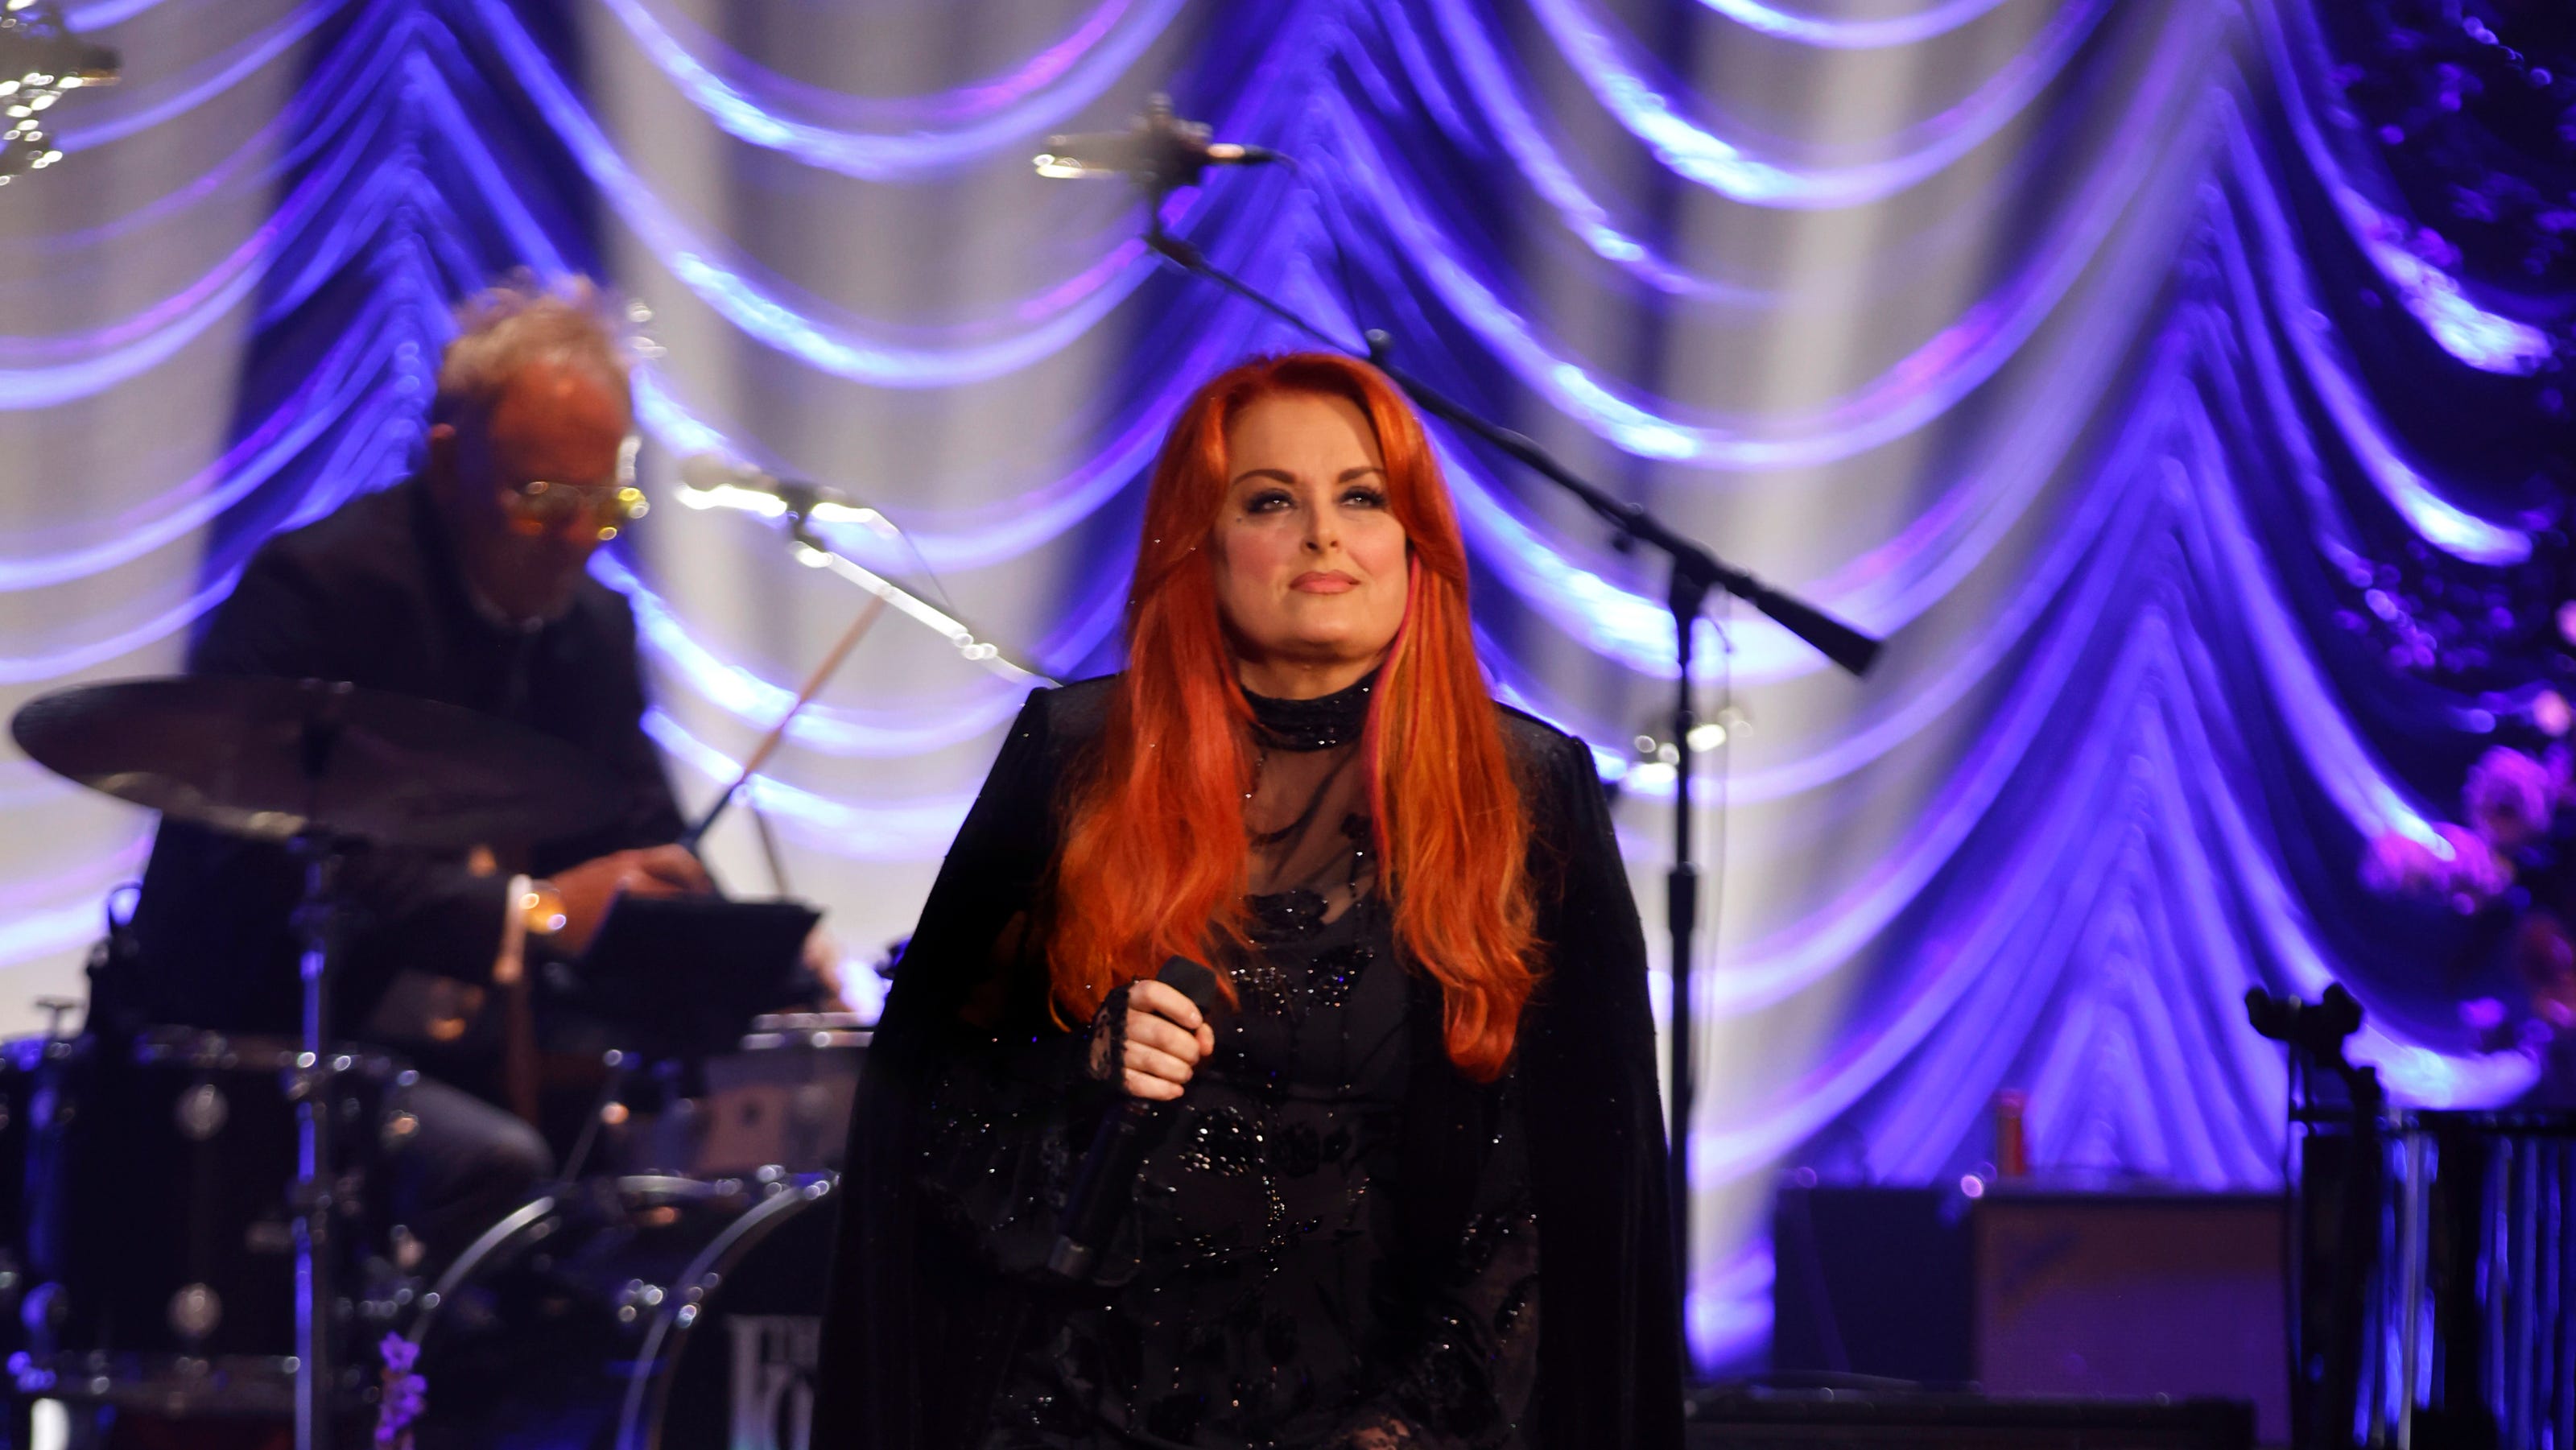 The Judds' tour will 'go on' with Wynonna, female country superstars